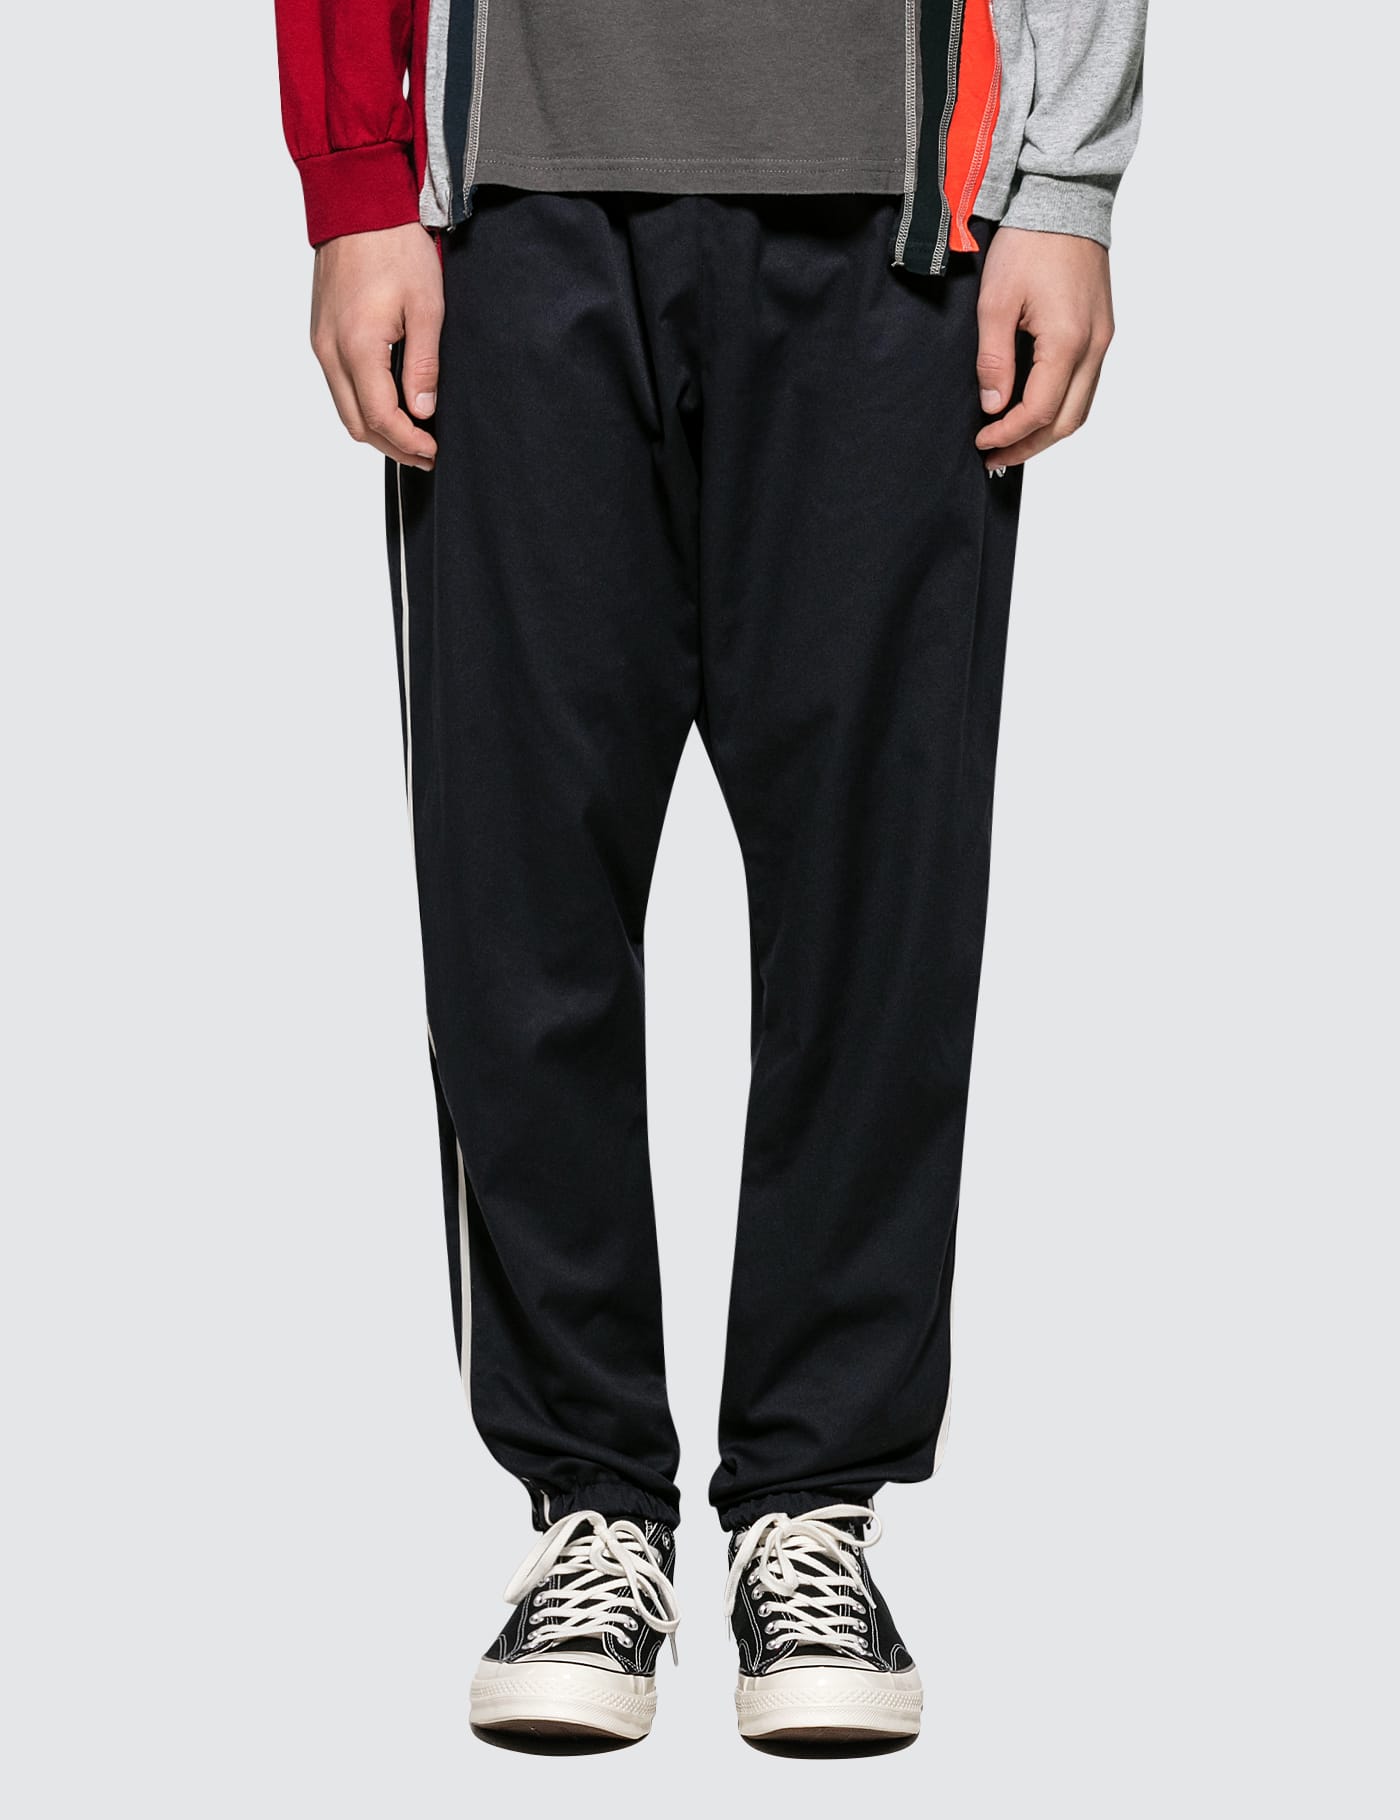 Needles - Side Line Seam Pocket Easy Pant | HBX - Globally Curated 